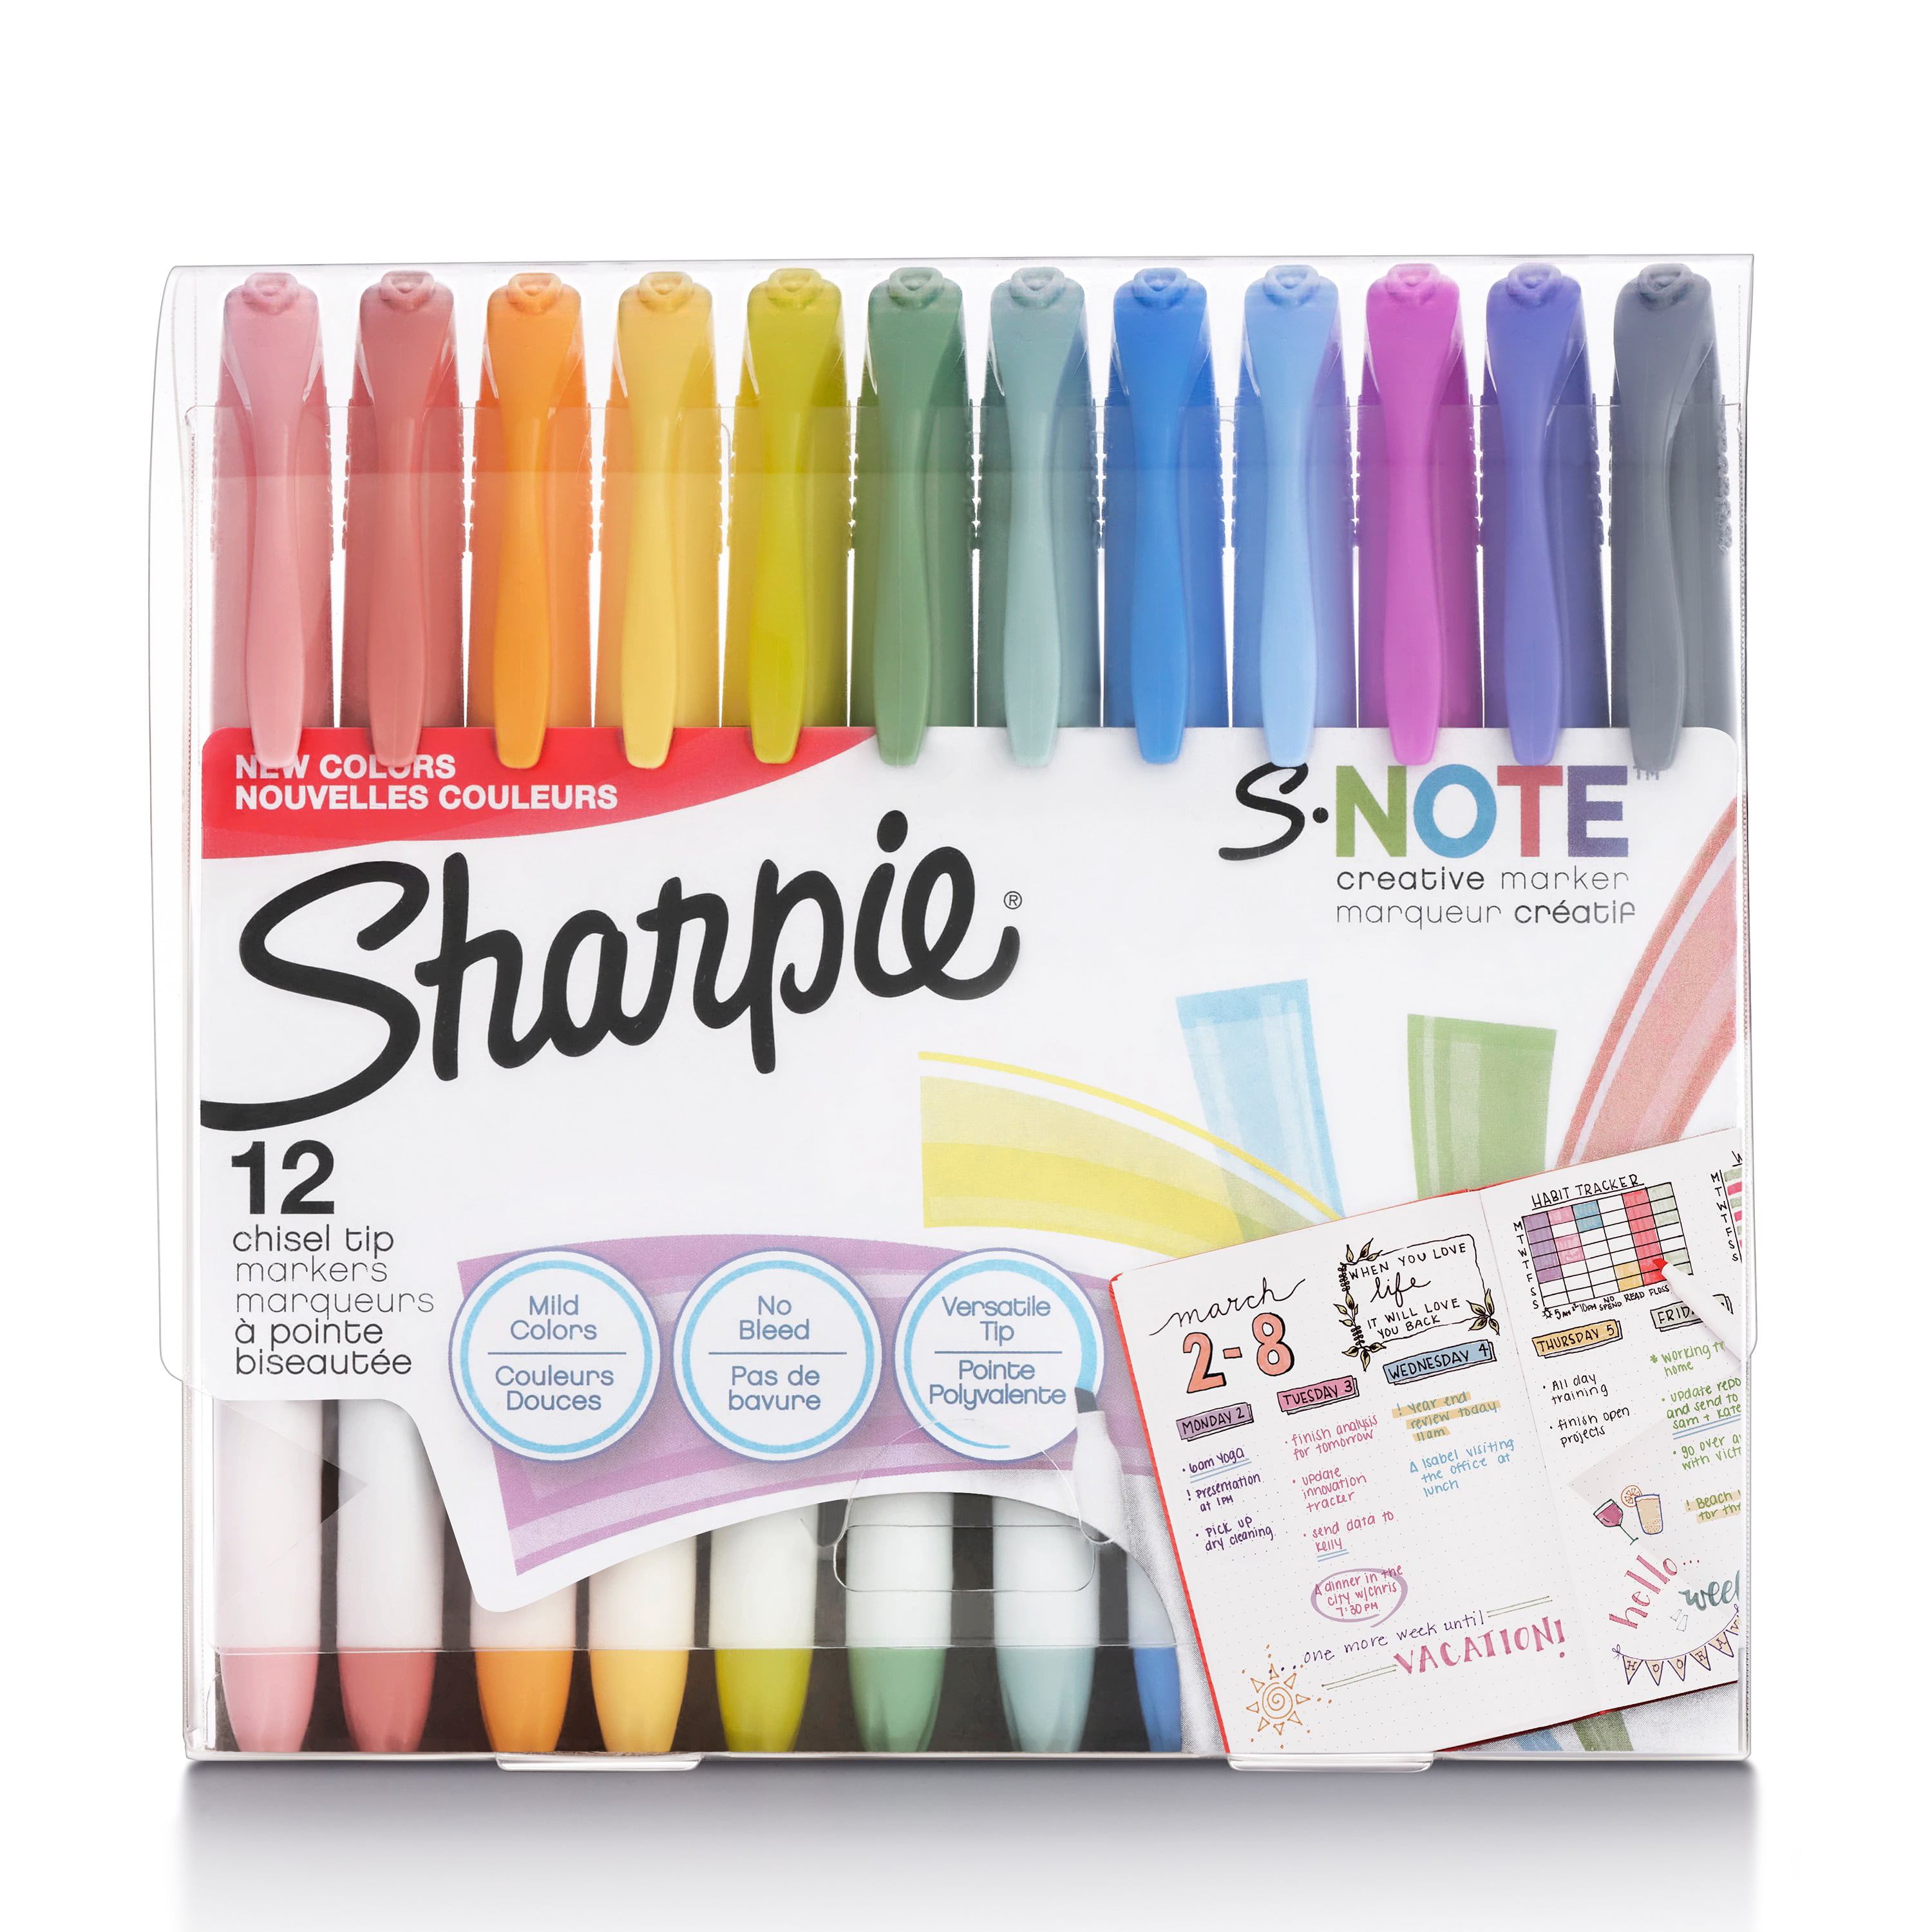 New 2 box  90s Sanford Mr Sketch Scented Water 12 Pen Colors Markers 